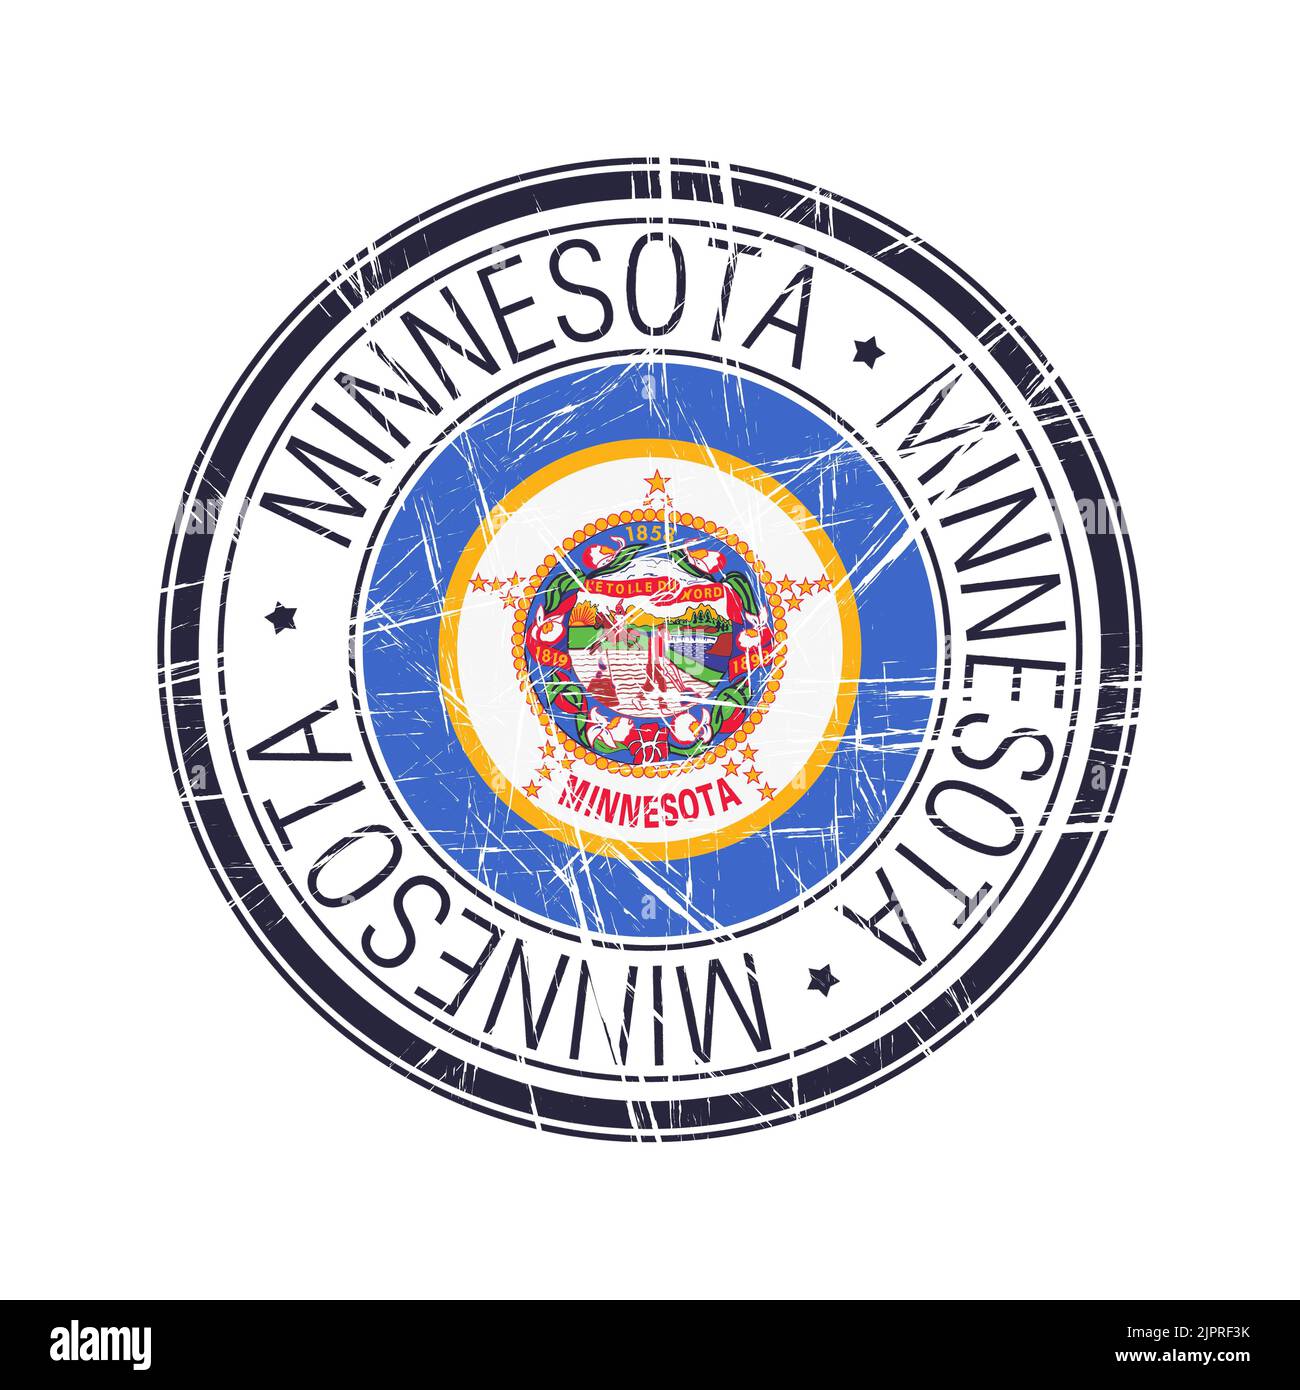 Great state of Minnesota postal rubber stamp, vector object over white background Stock Photo